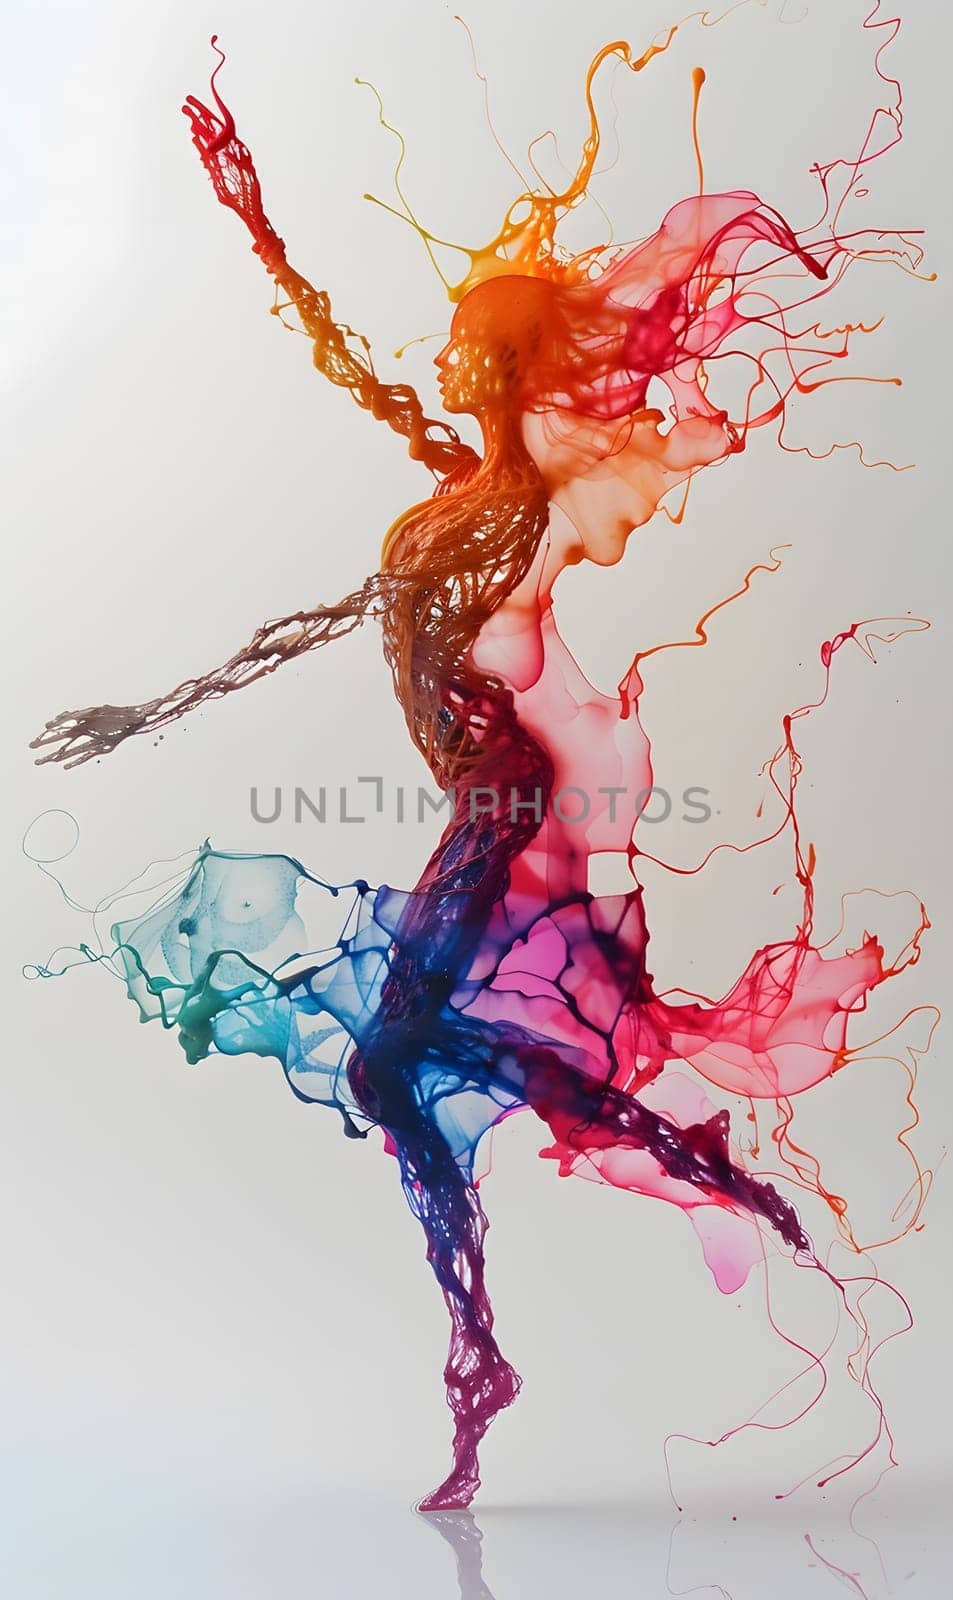 a colorful painting of a woman dancing with paint splashing around her by Nadtochiy